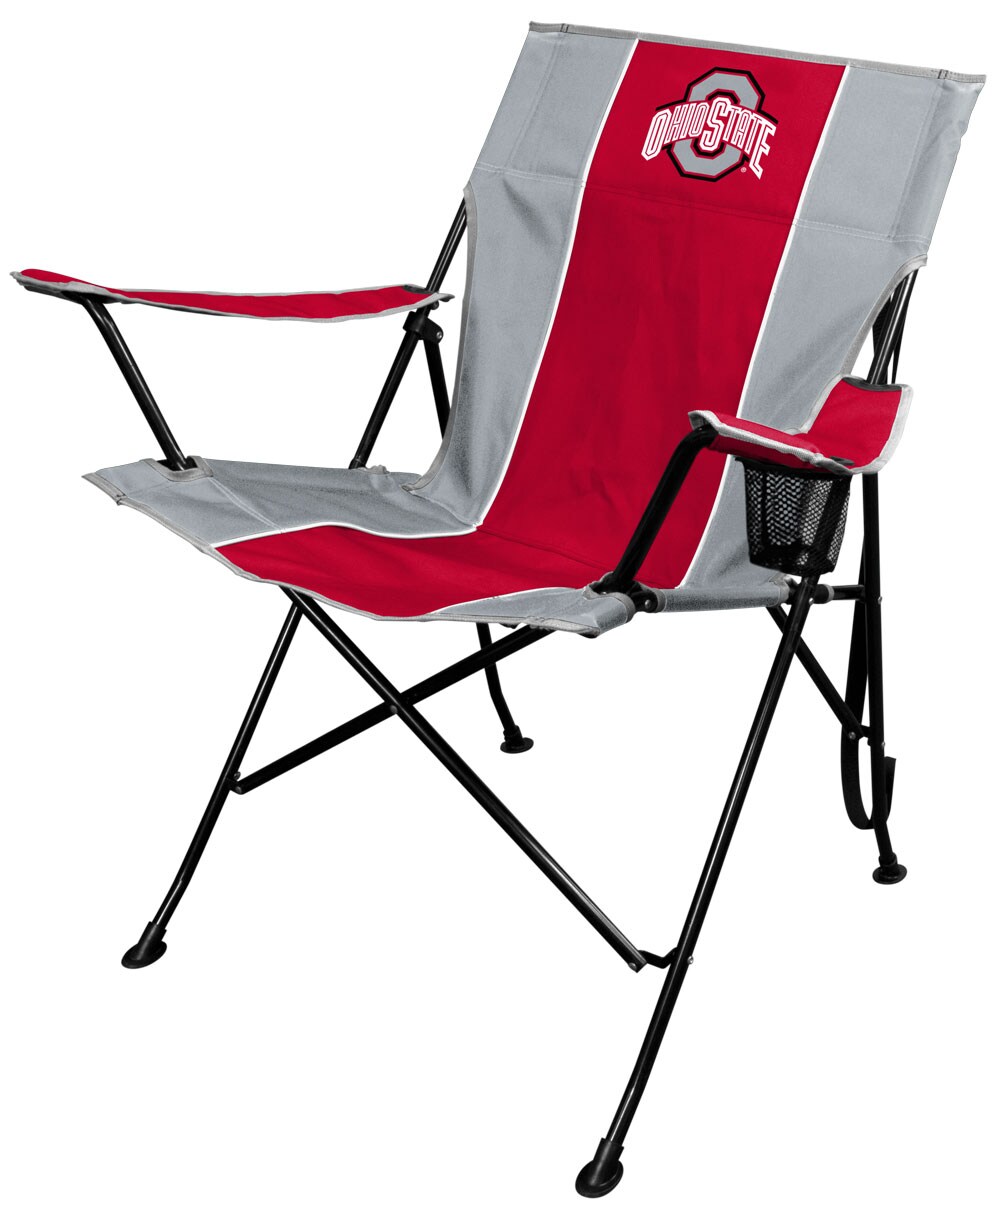 Appalachian State Rawlings NCAA 4.0 Folding Tailgating & Camping Chair with Carry Case